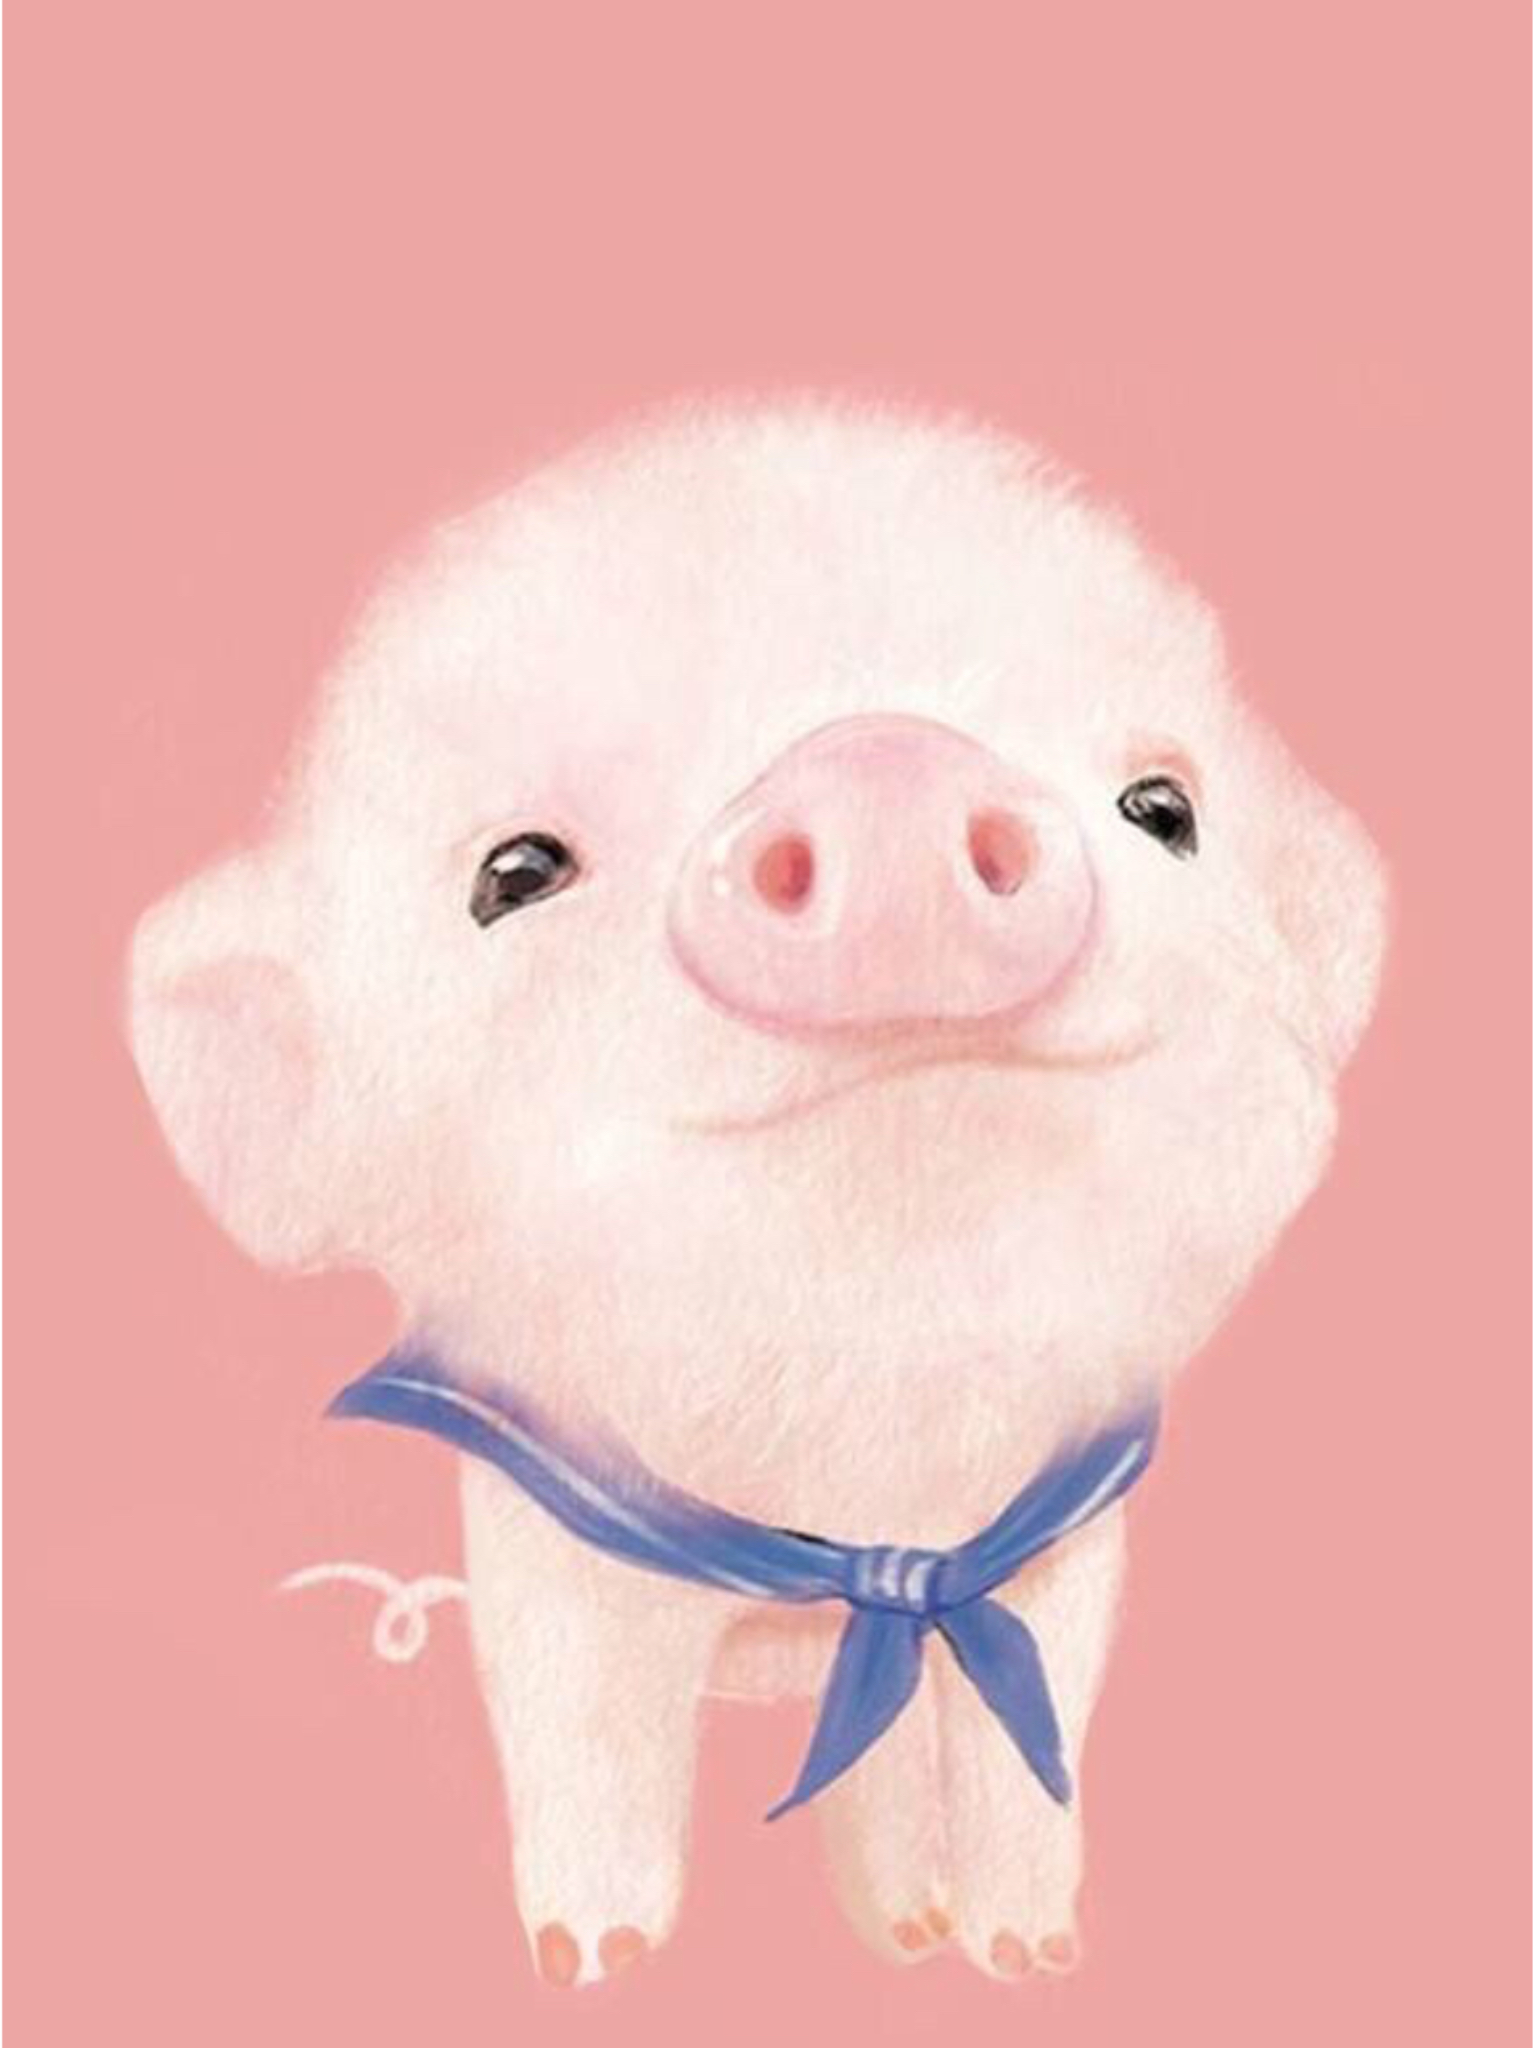 Pig Iphone Wallpapers